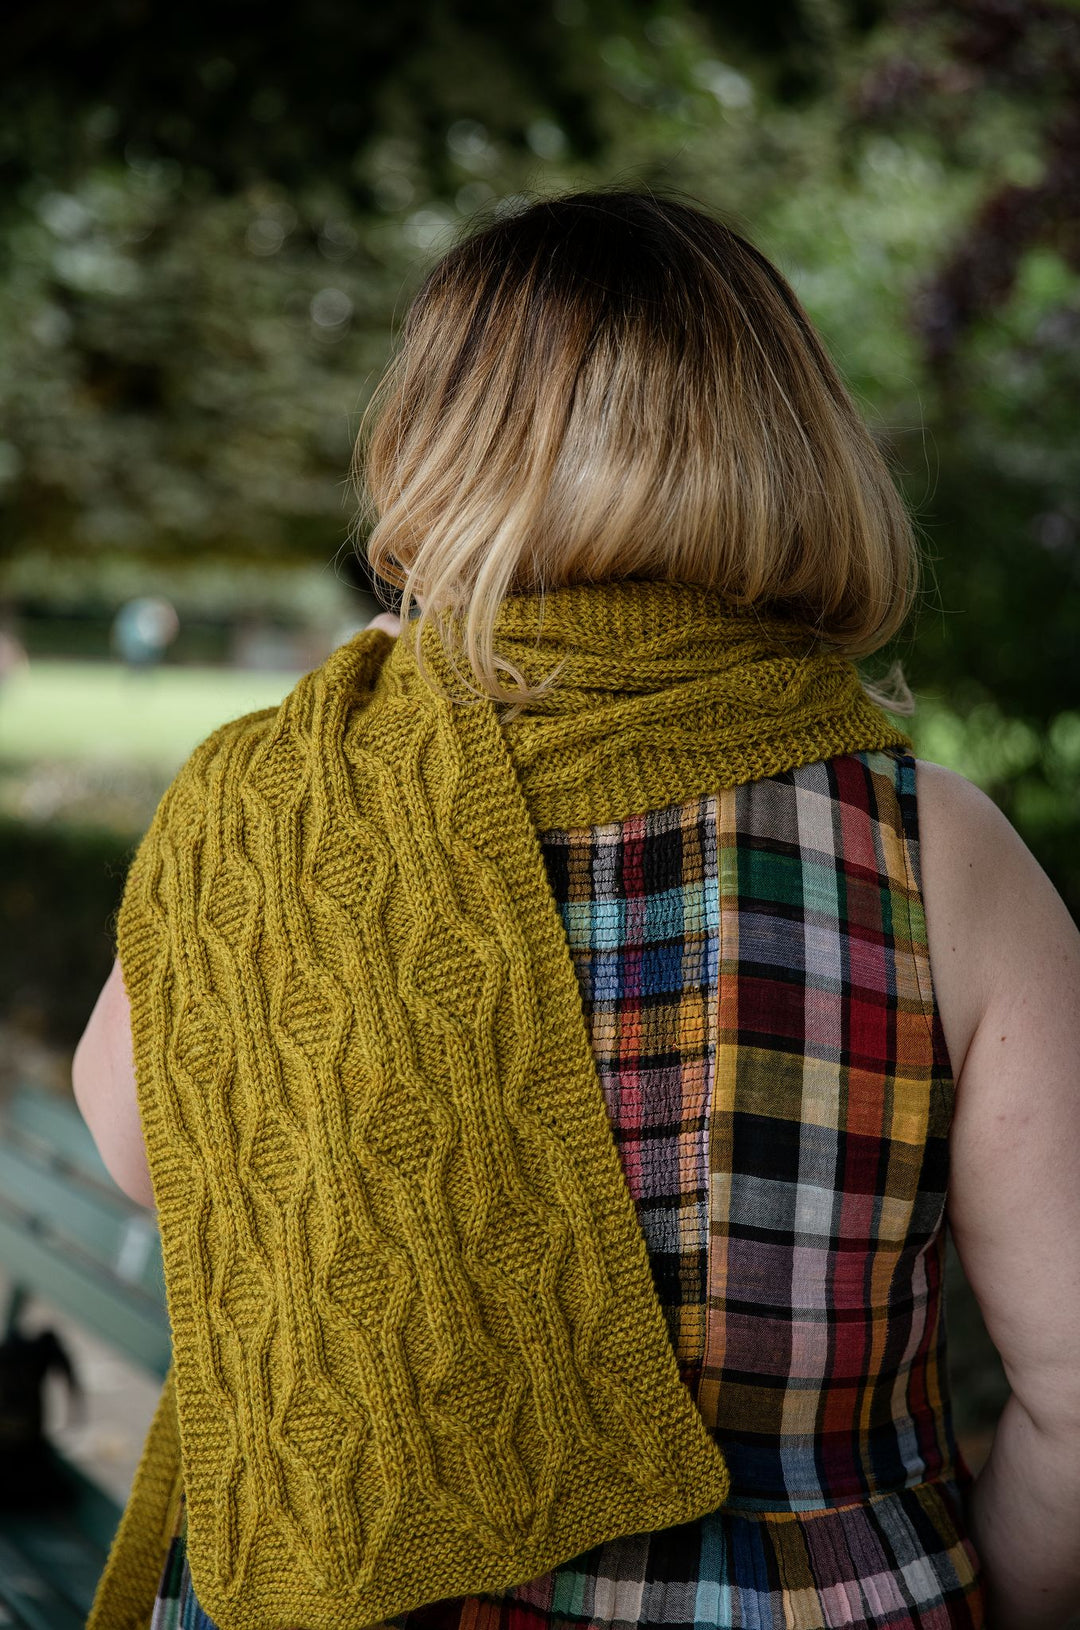 WORSTED - A Knitwear Collection Curated by Aimée Gille (Laine Publishing)